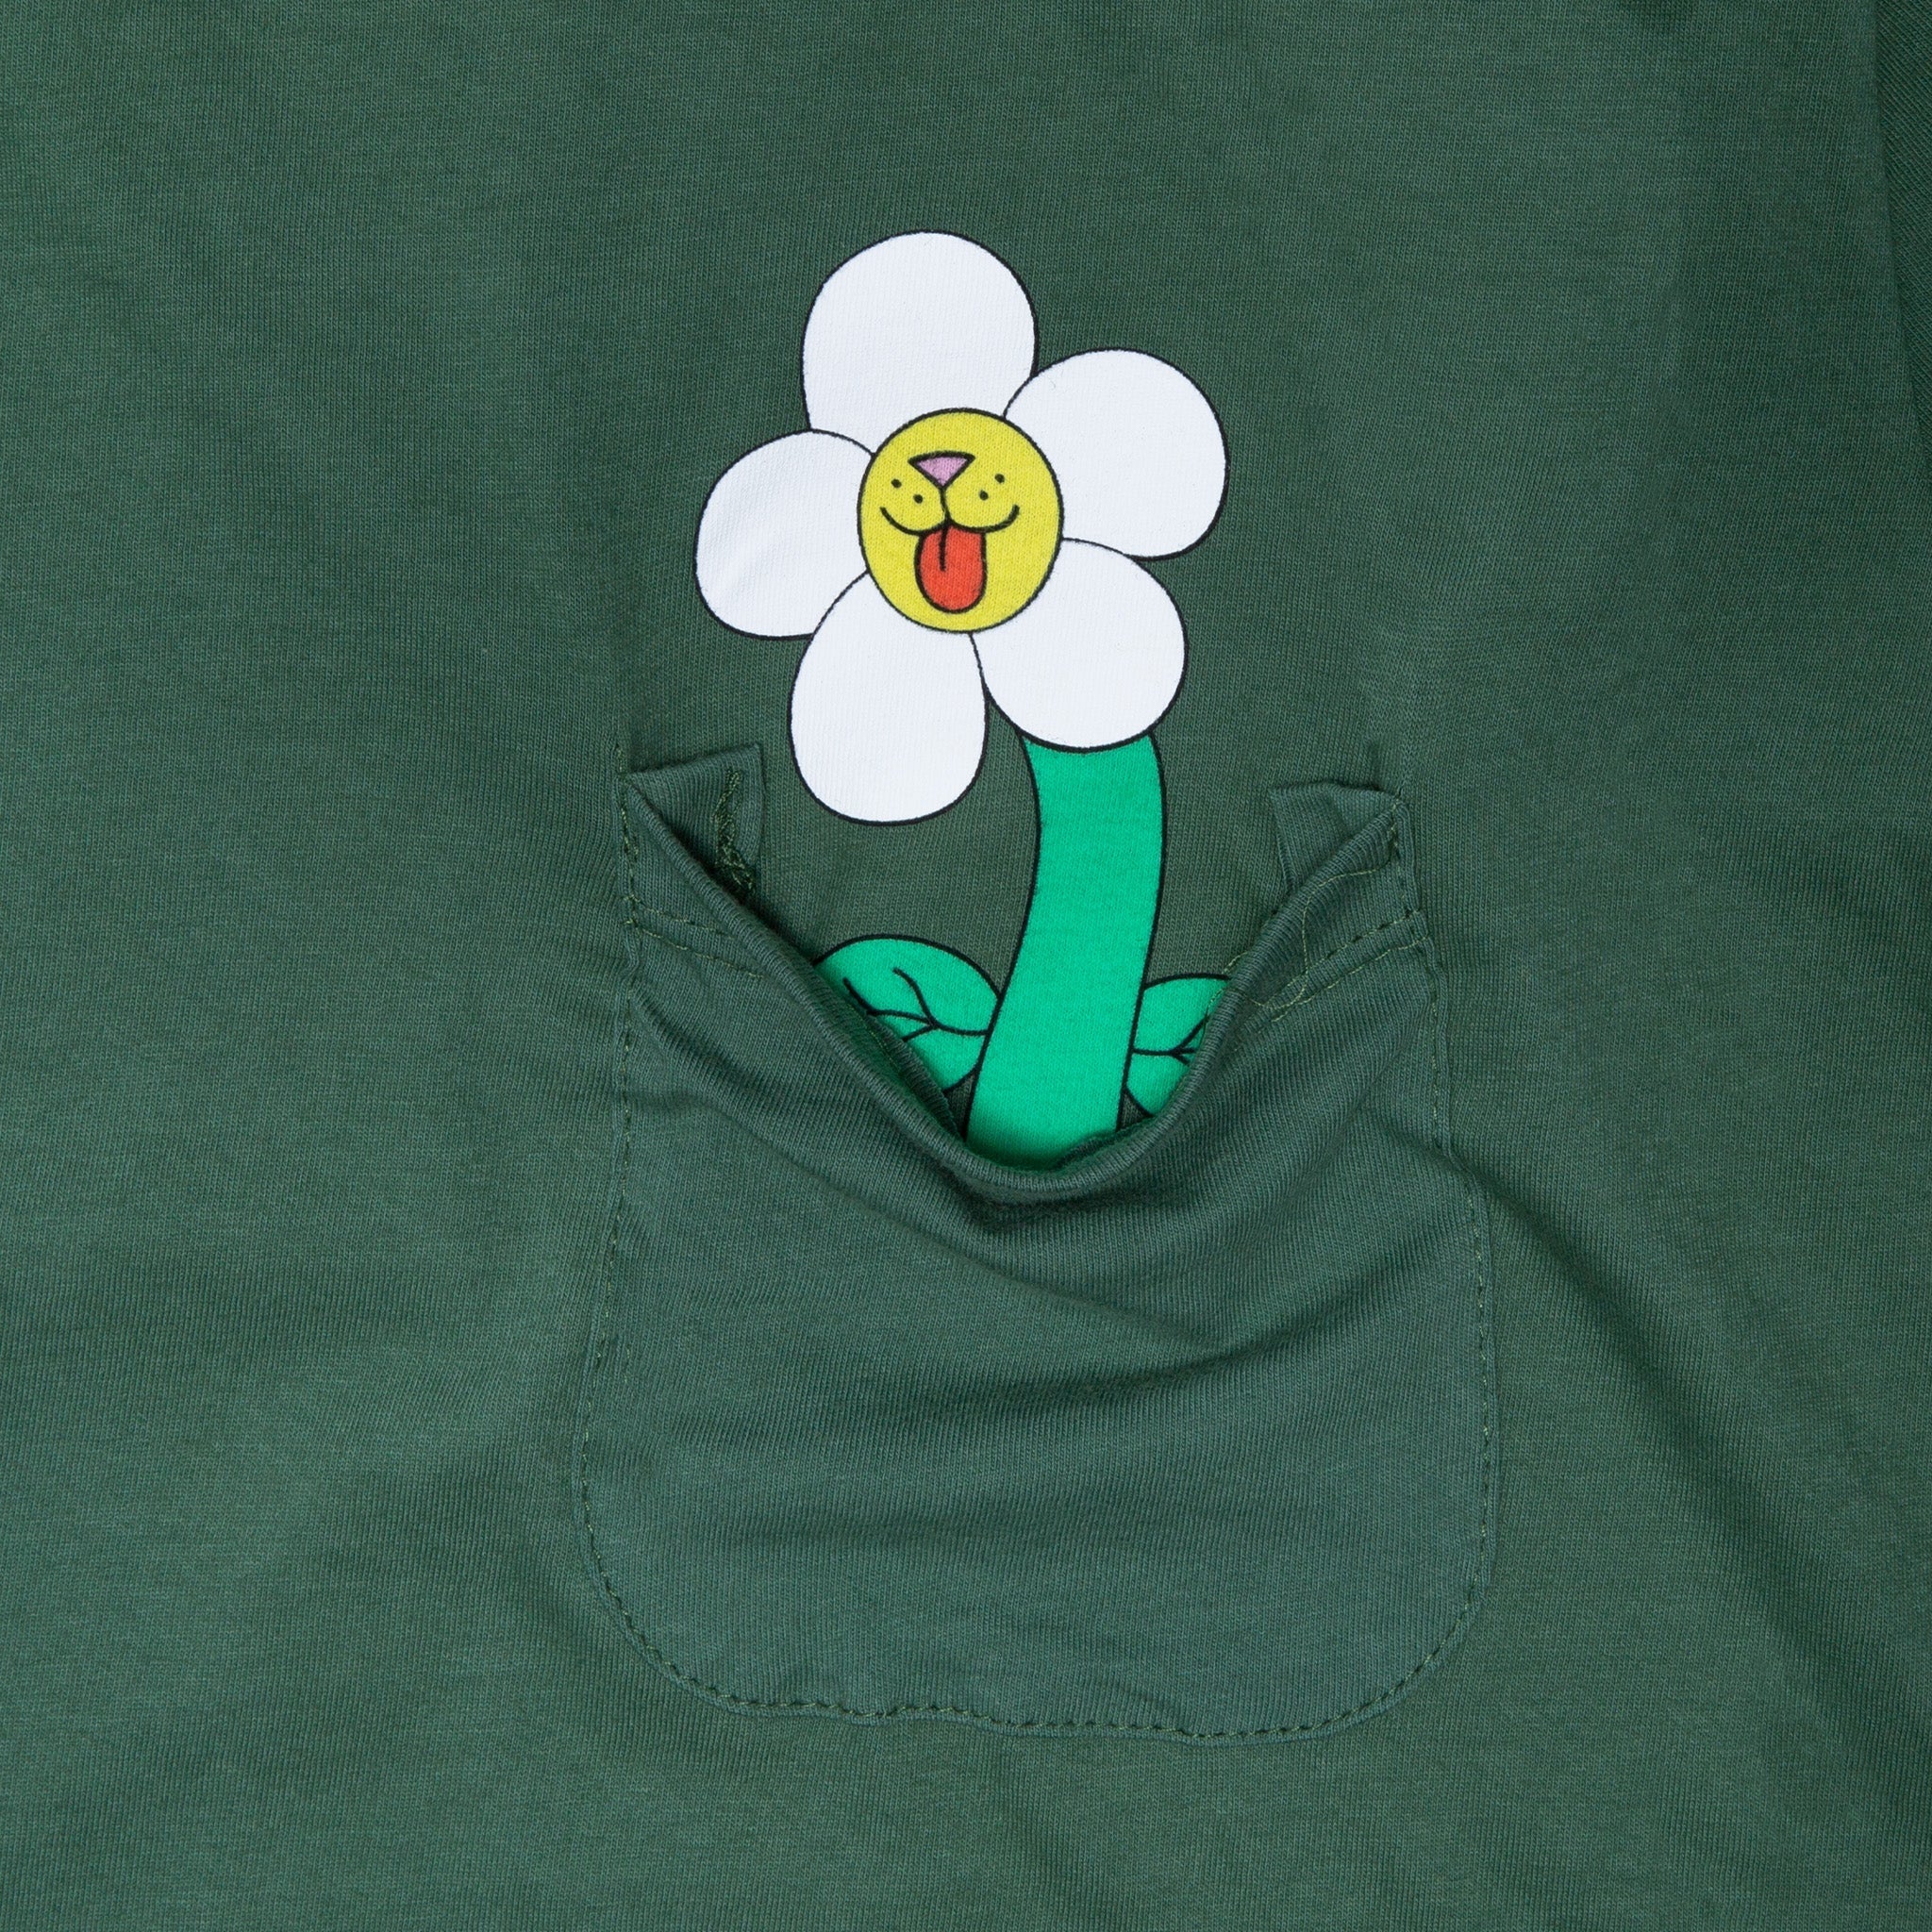 Nerms Of A Feather Pocket Tee (Olive)